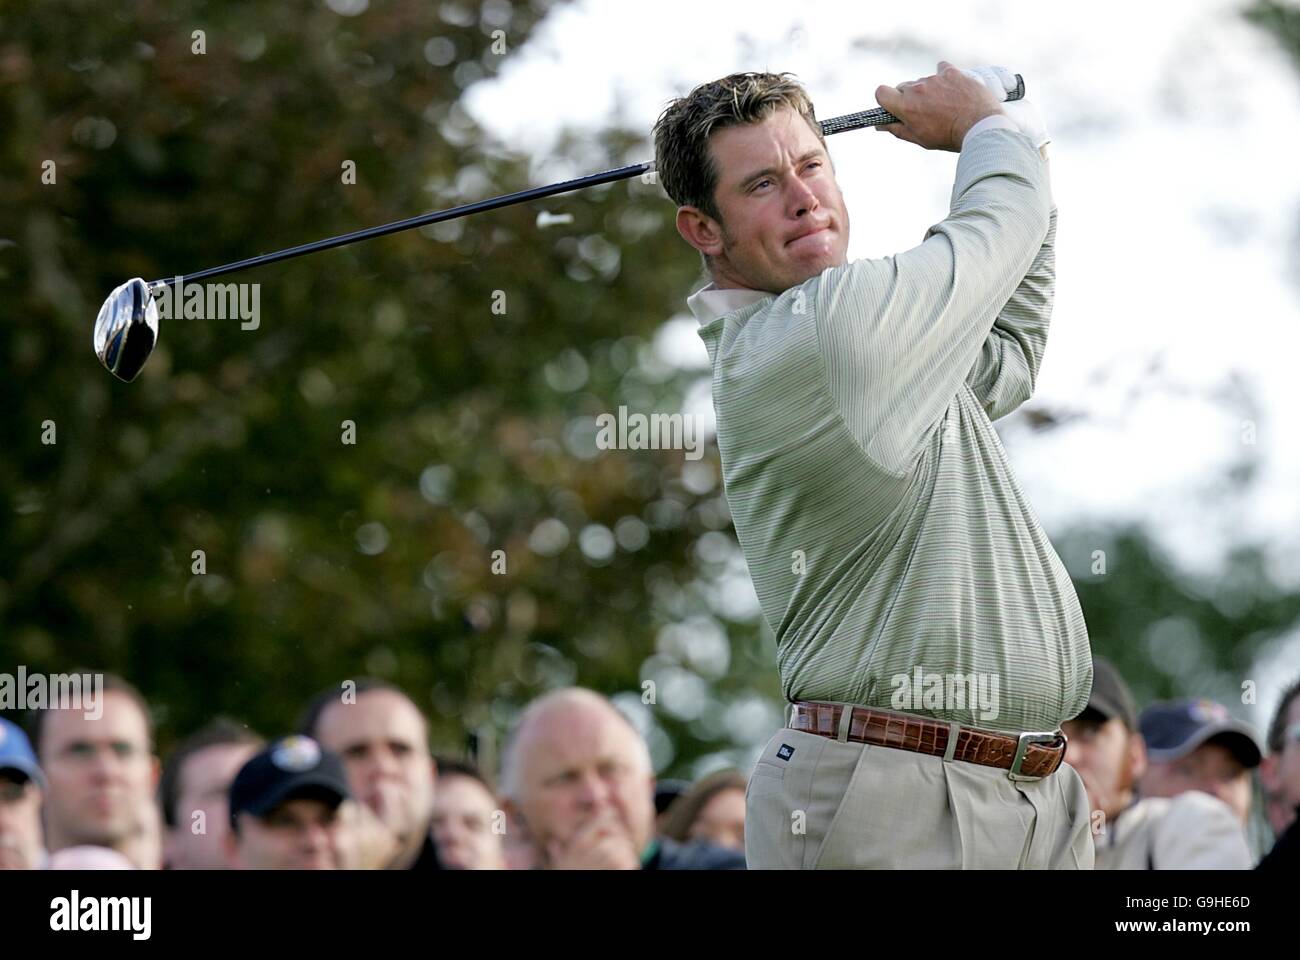 Golf - 36th Ryder Cup - Day One - The K Club. Lee Westwood, Europe Ryder Cup Team. Stock Photo